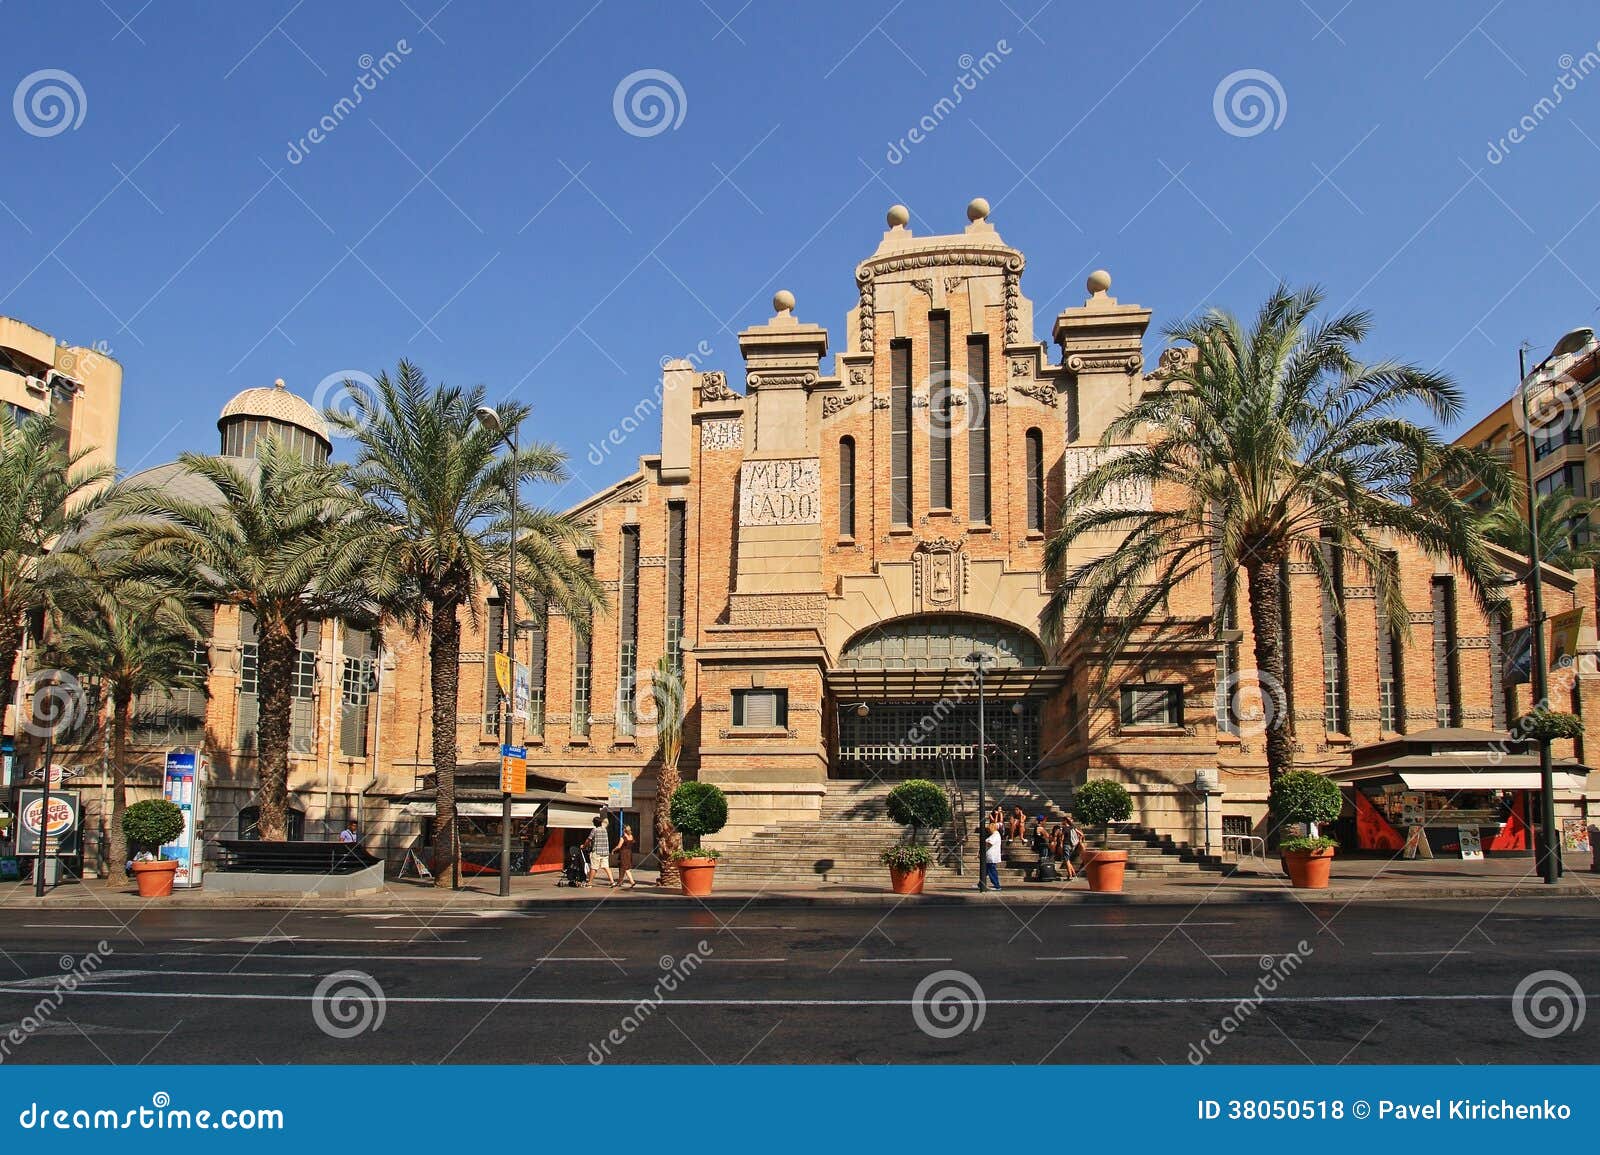 eclectic style central market of alicante